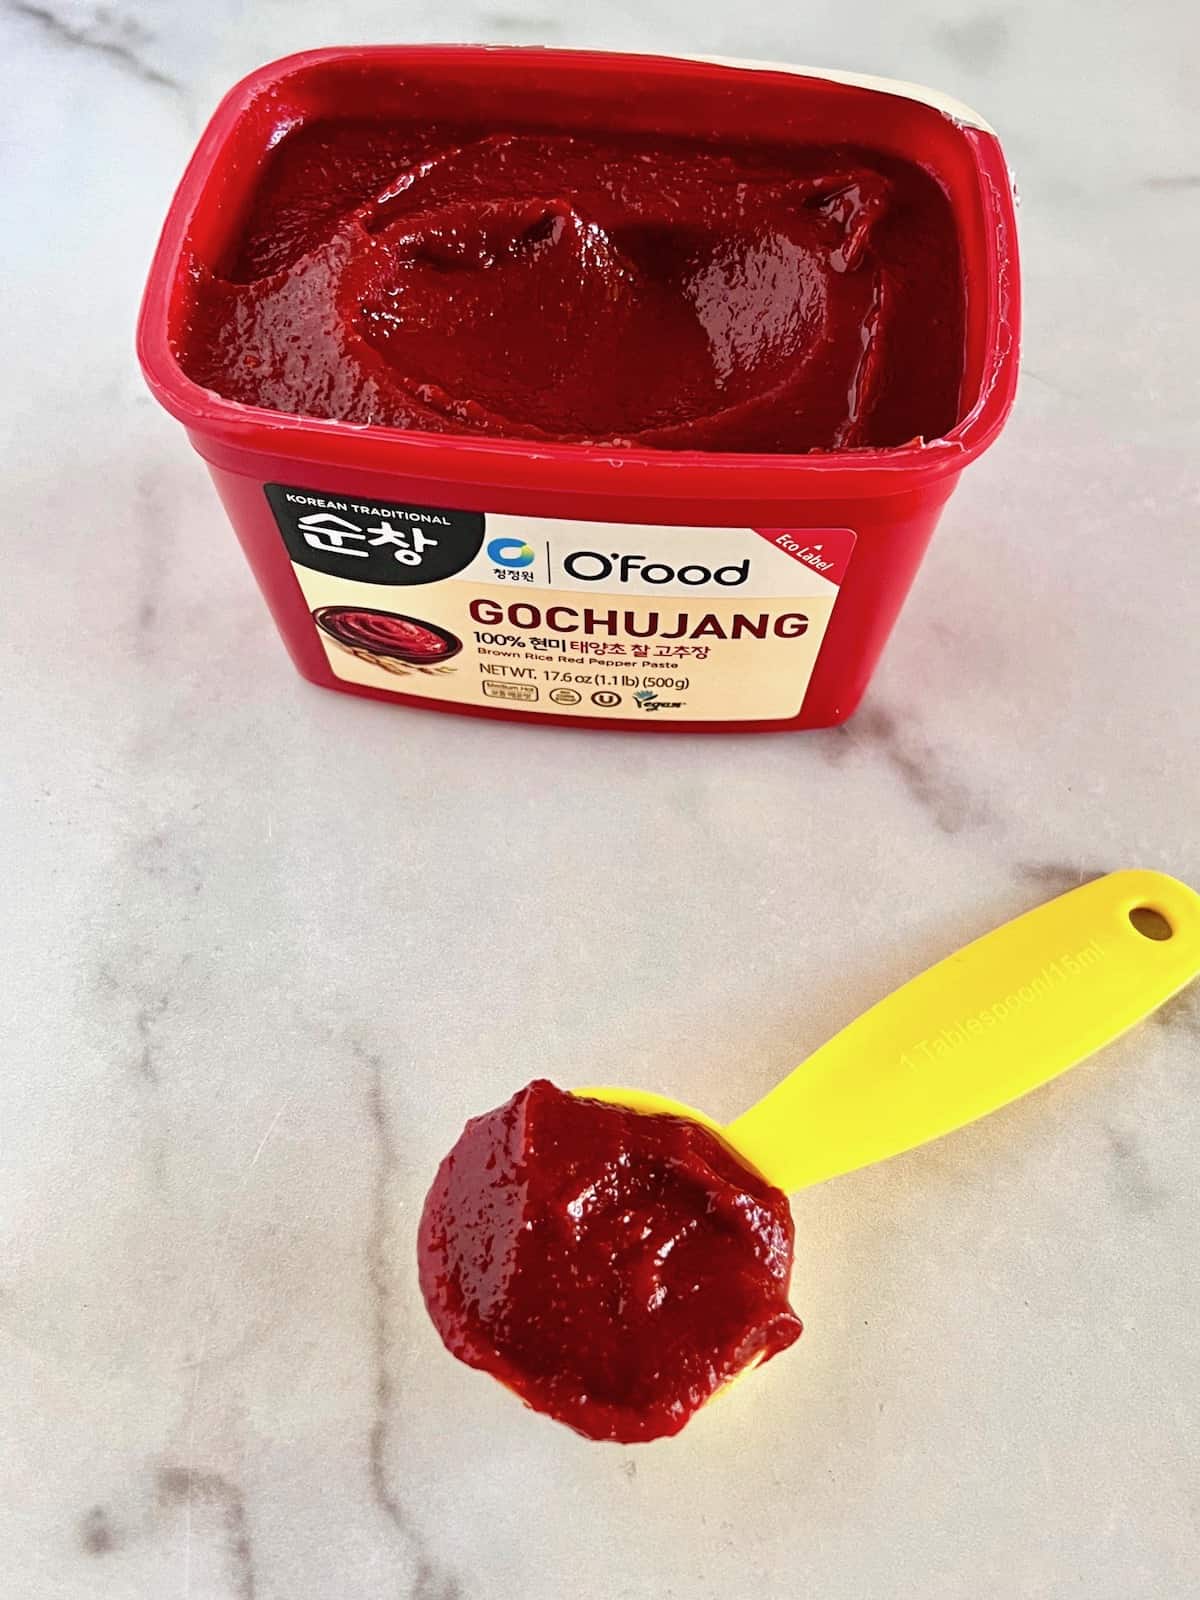 Tub of gochujang next to a measuring tablespoon filled with the spicy korean paste.